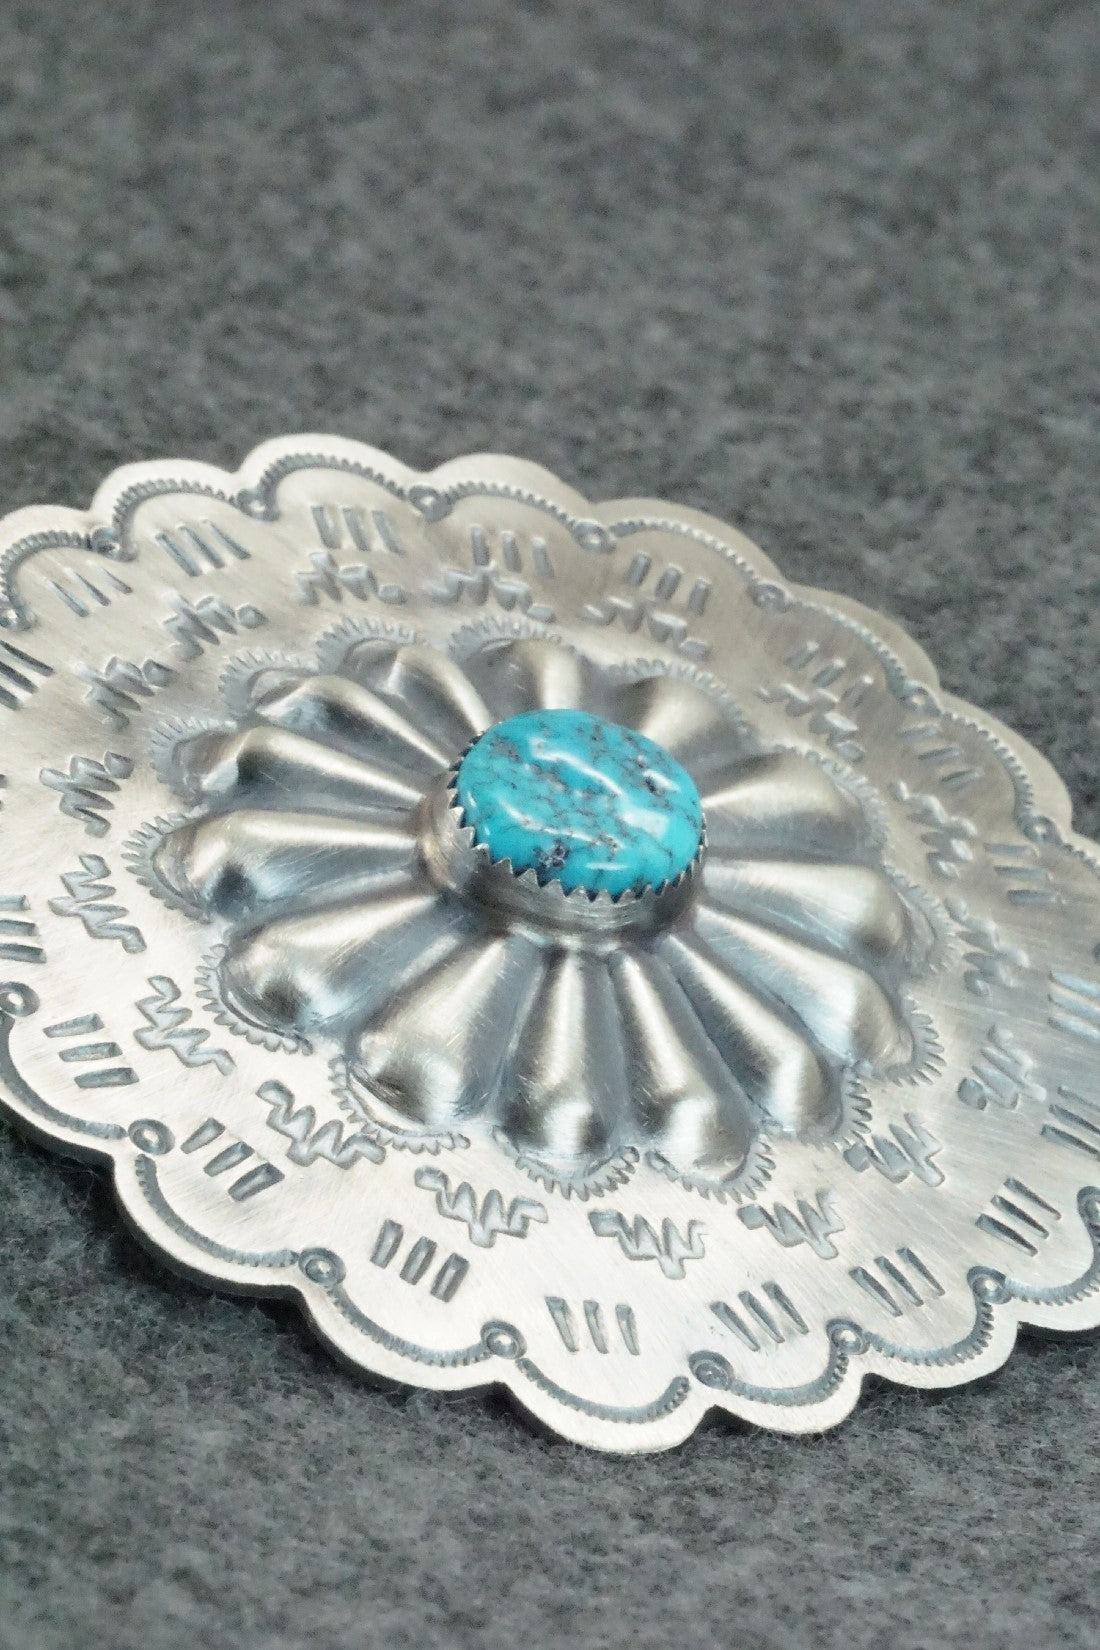 Turquoise & Sterling Silver Pin - Dale Morgan